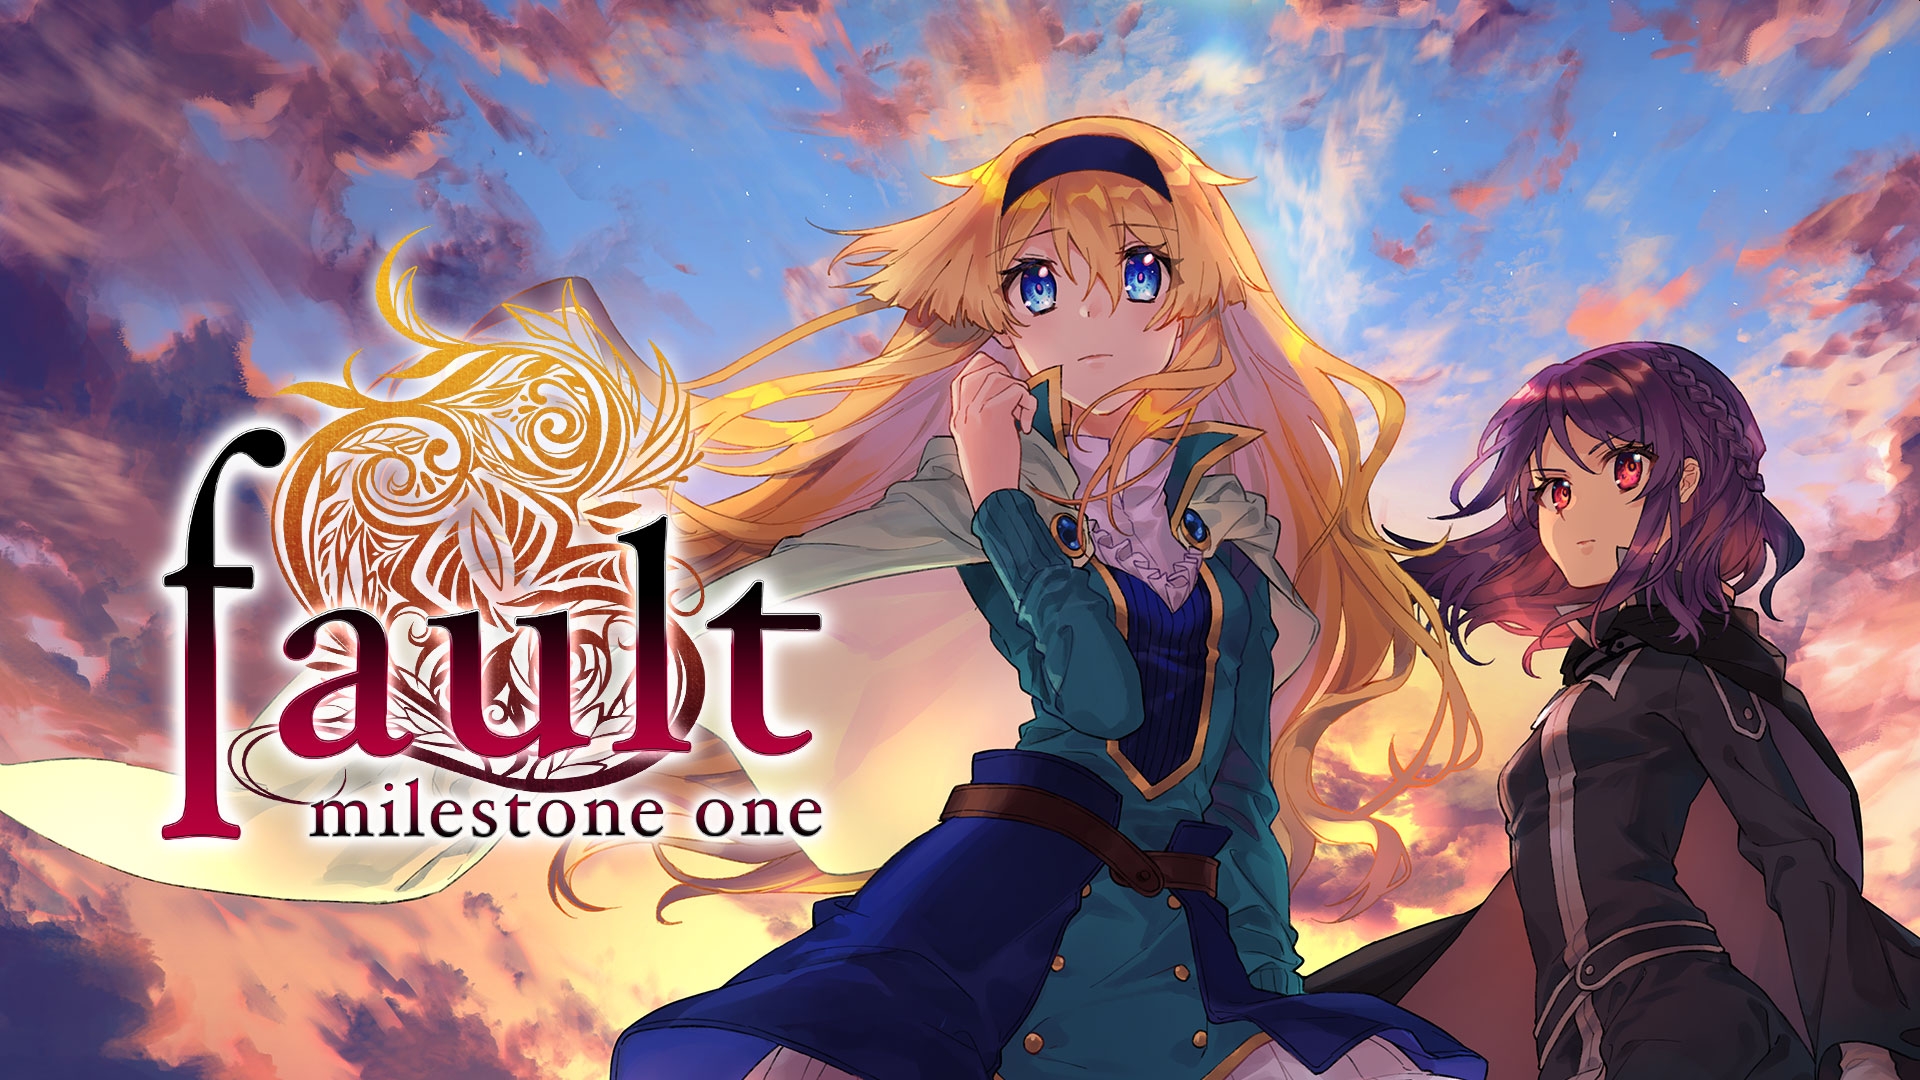 Fault – Milestone One Physical Release Pre-Orders Open For PlayStation 4 And Nintendo Switch